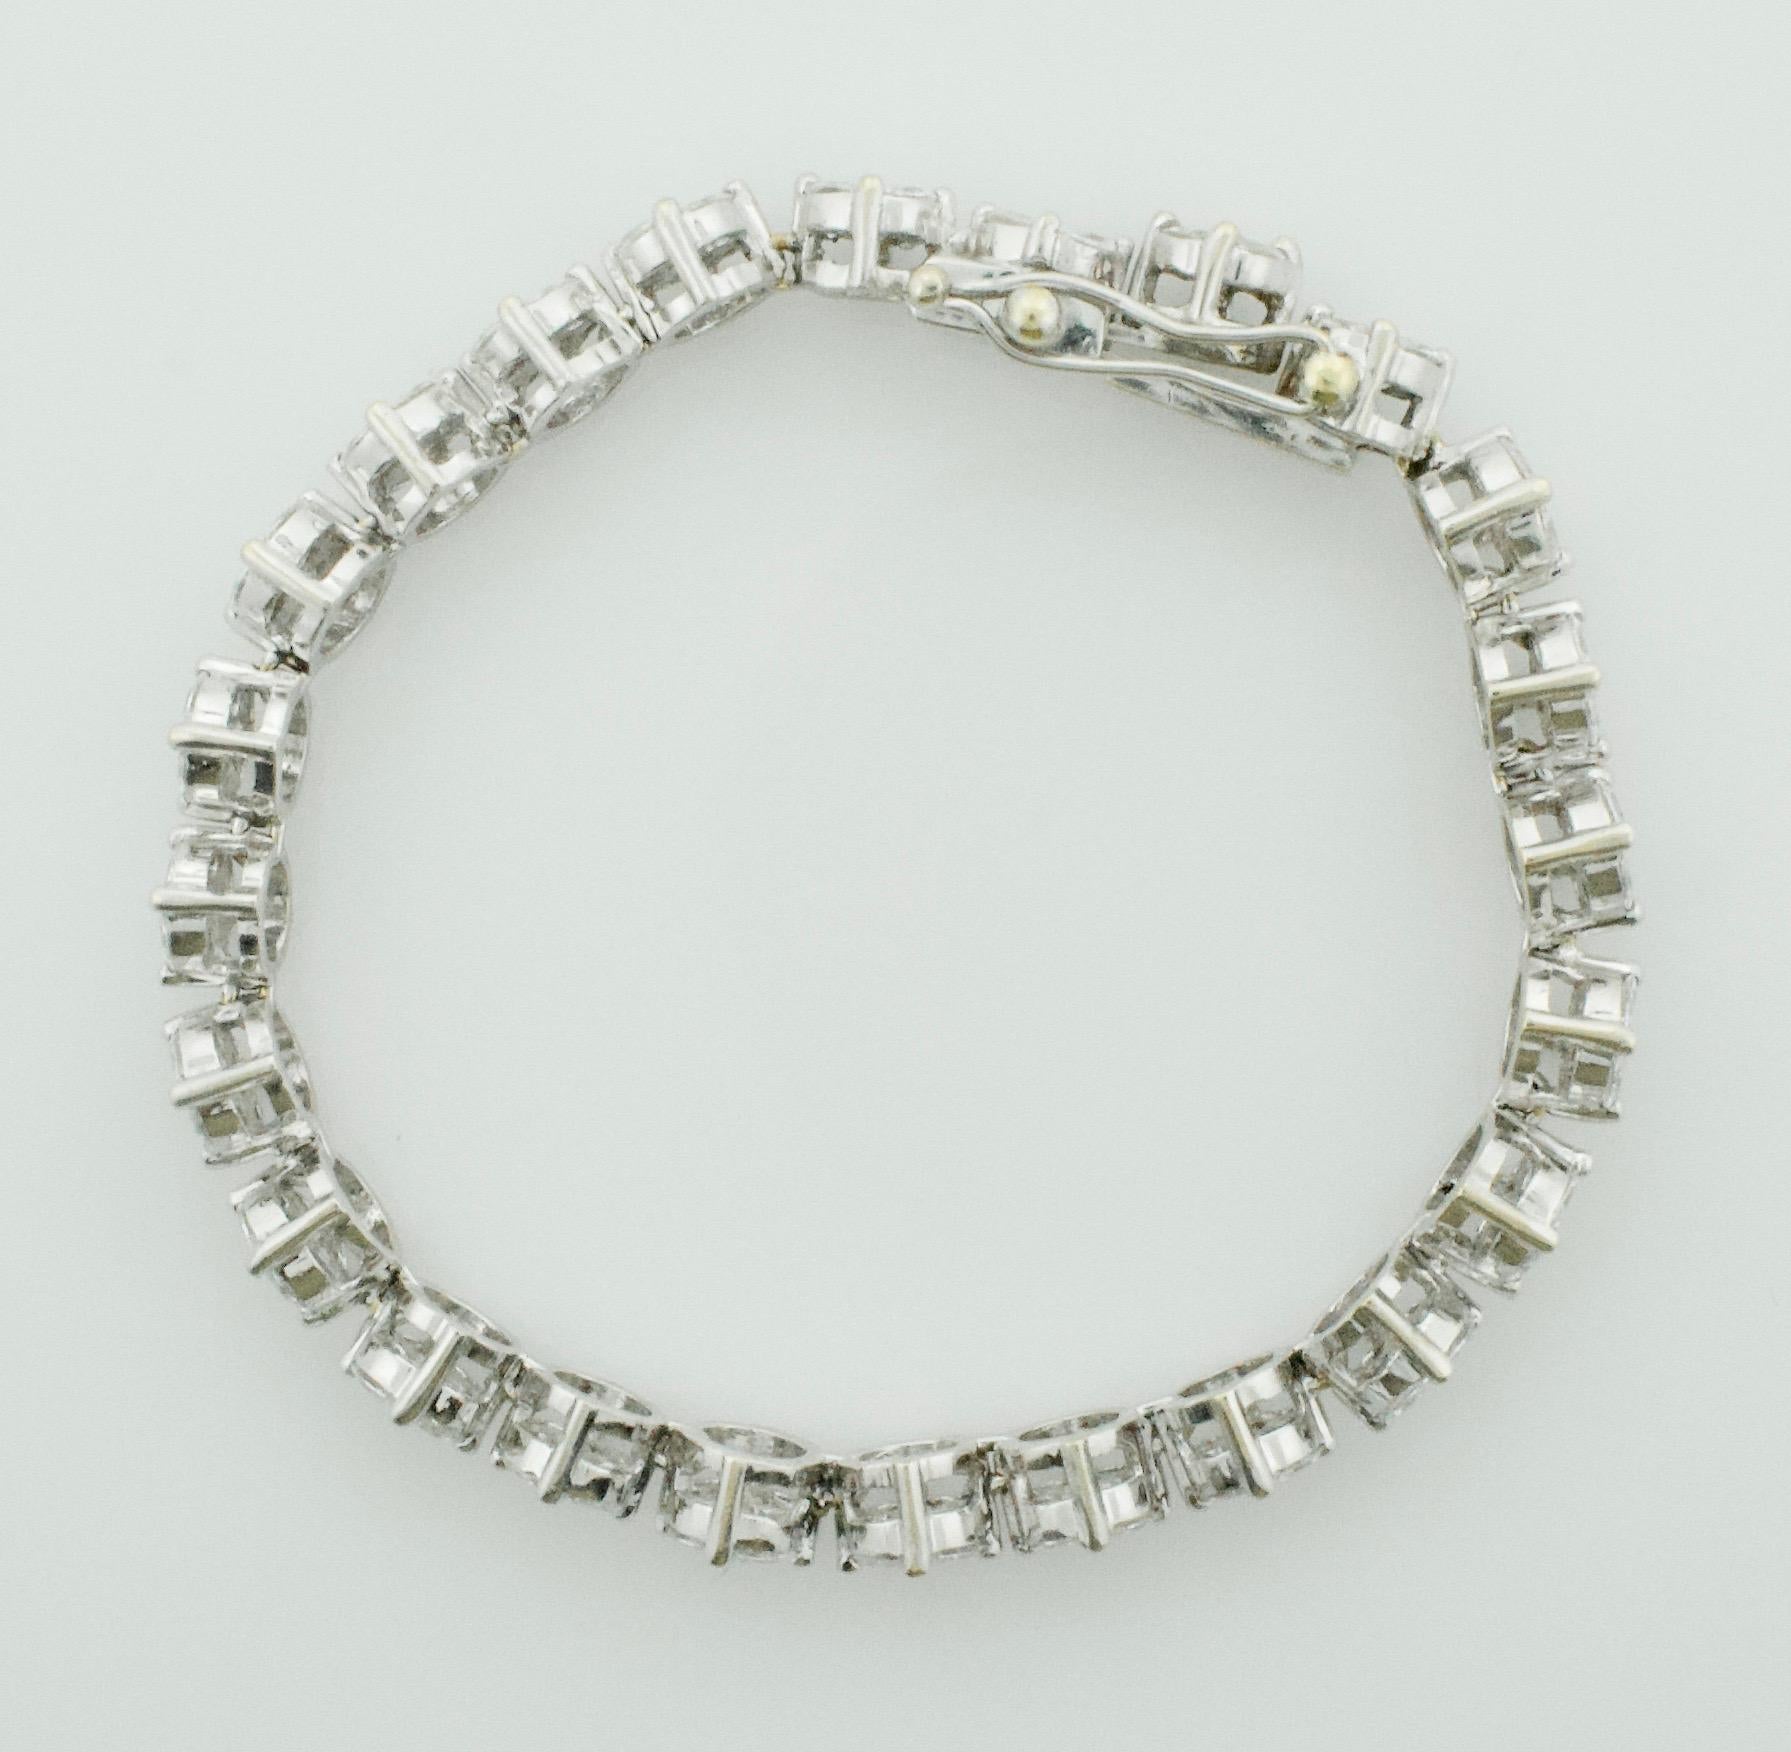 Diamond Tennis Bracelet in Platinum and White Gold 7.20 carats Petite Size
Each Link is Compose of Five Fancy Shaped Diamonds.  (Four Marquises and One Princess Cut) Each Link is 6.4 mm.  This Gives The Look of a One Carat Diamond.
Twenty Four